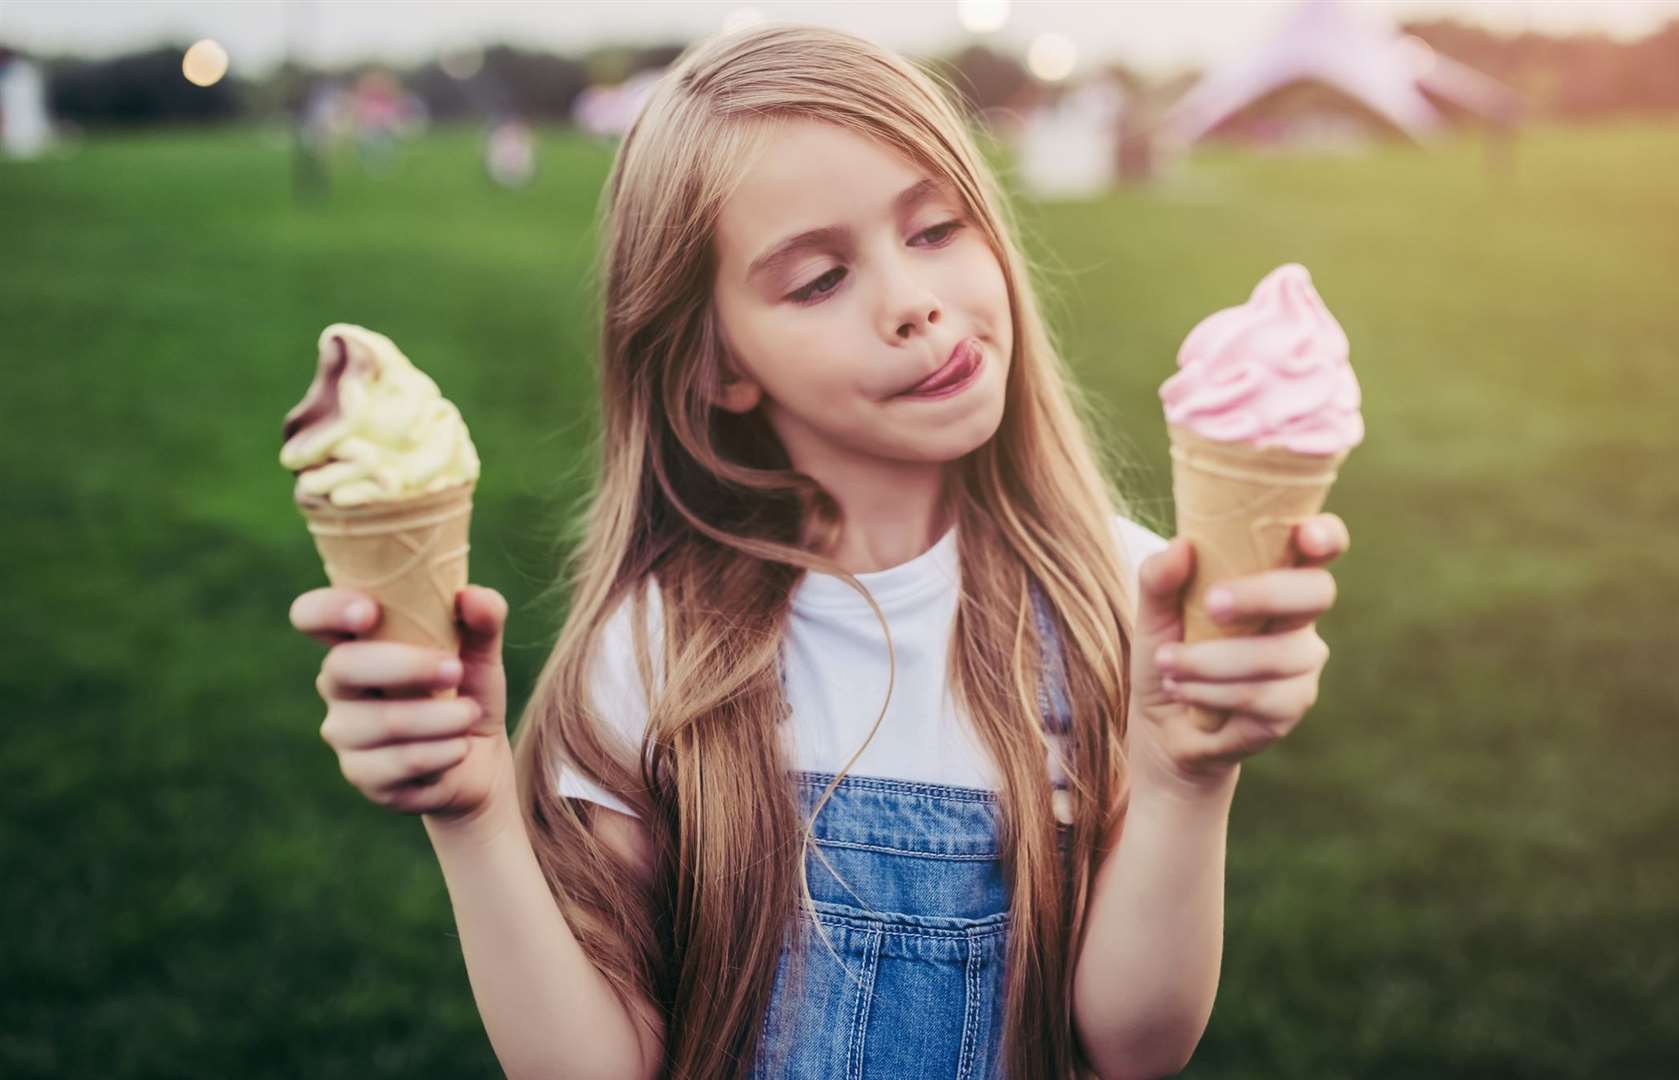 There's an ice cream festival at Kent Life, Maidstone